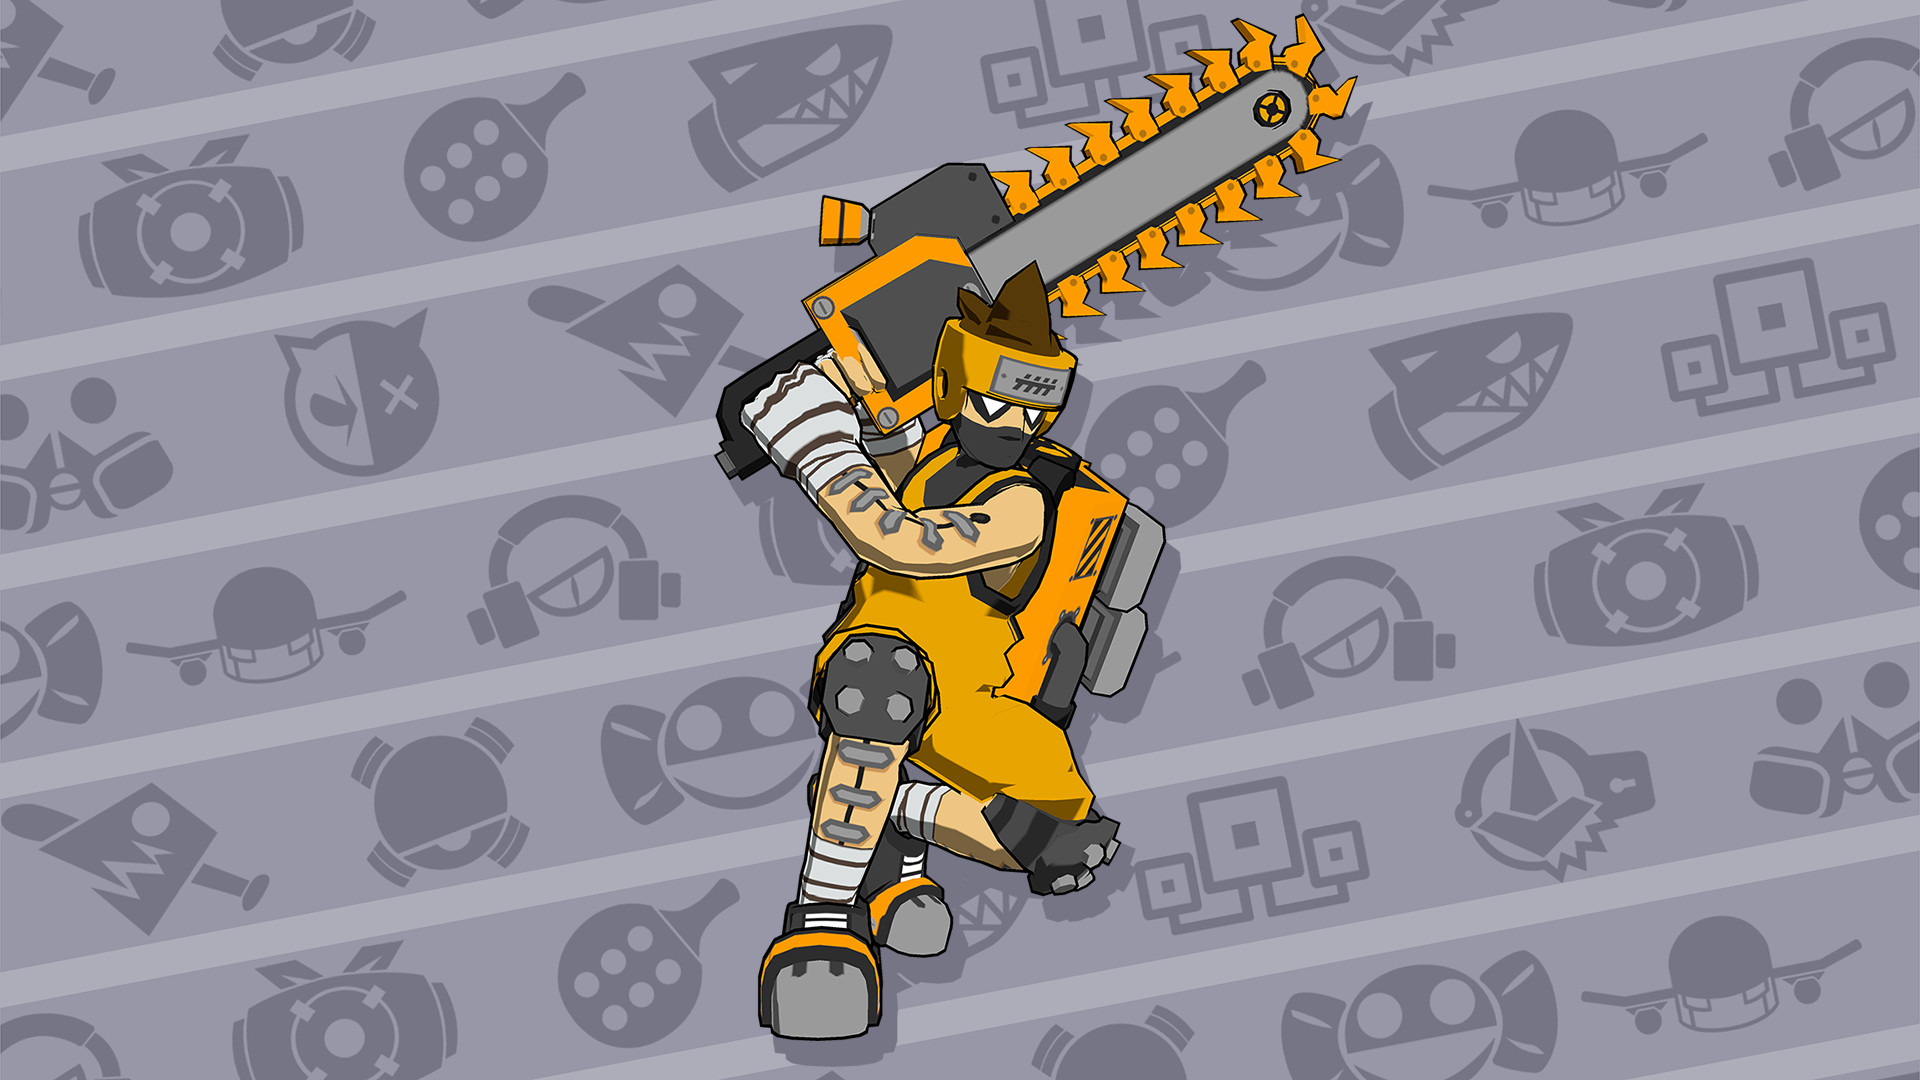 Lethal League Blaze - Heavyduty R. Evolution Outfit for Raptor Featured Screenshot #1